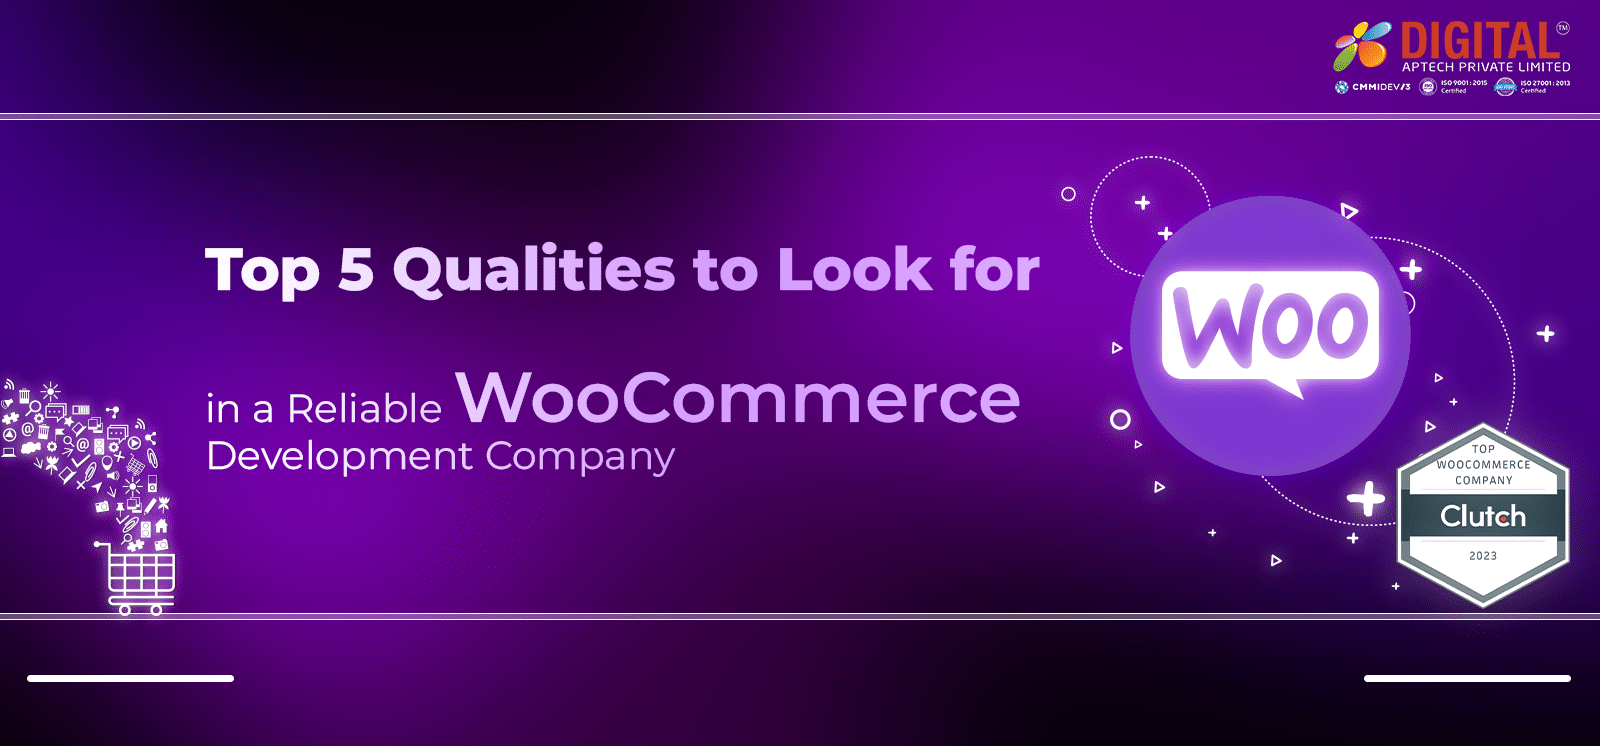 Top 5 Qualities to Look for in a Reliable WooCommerce Development Company